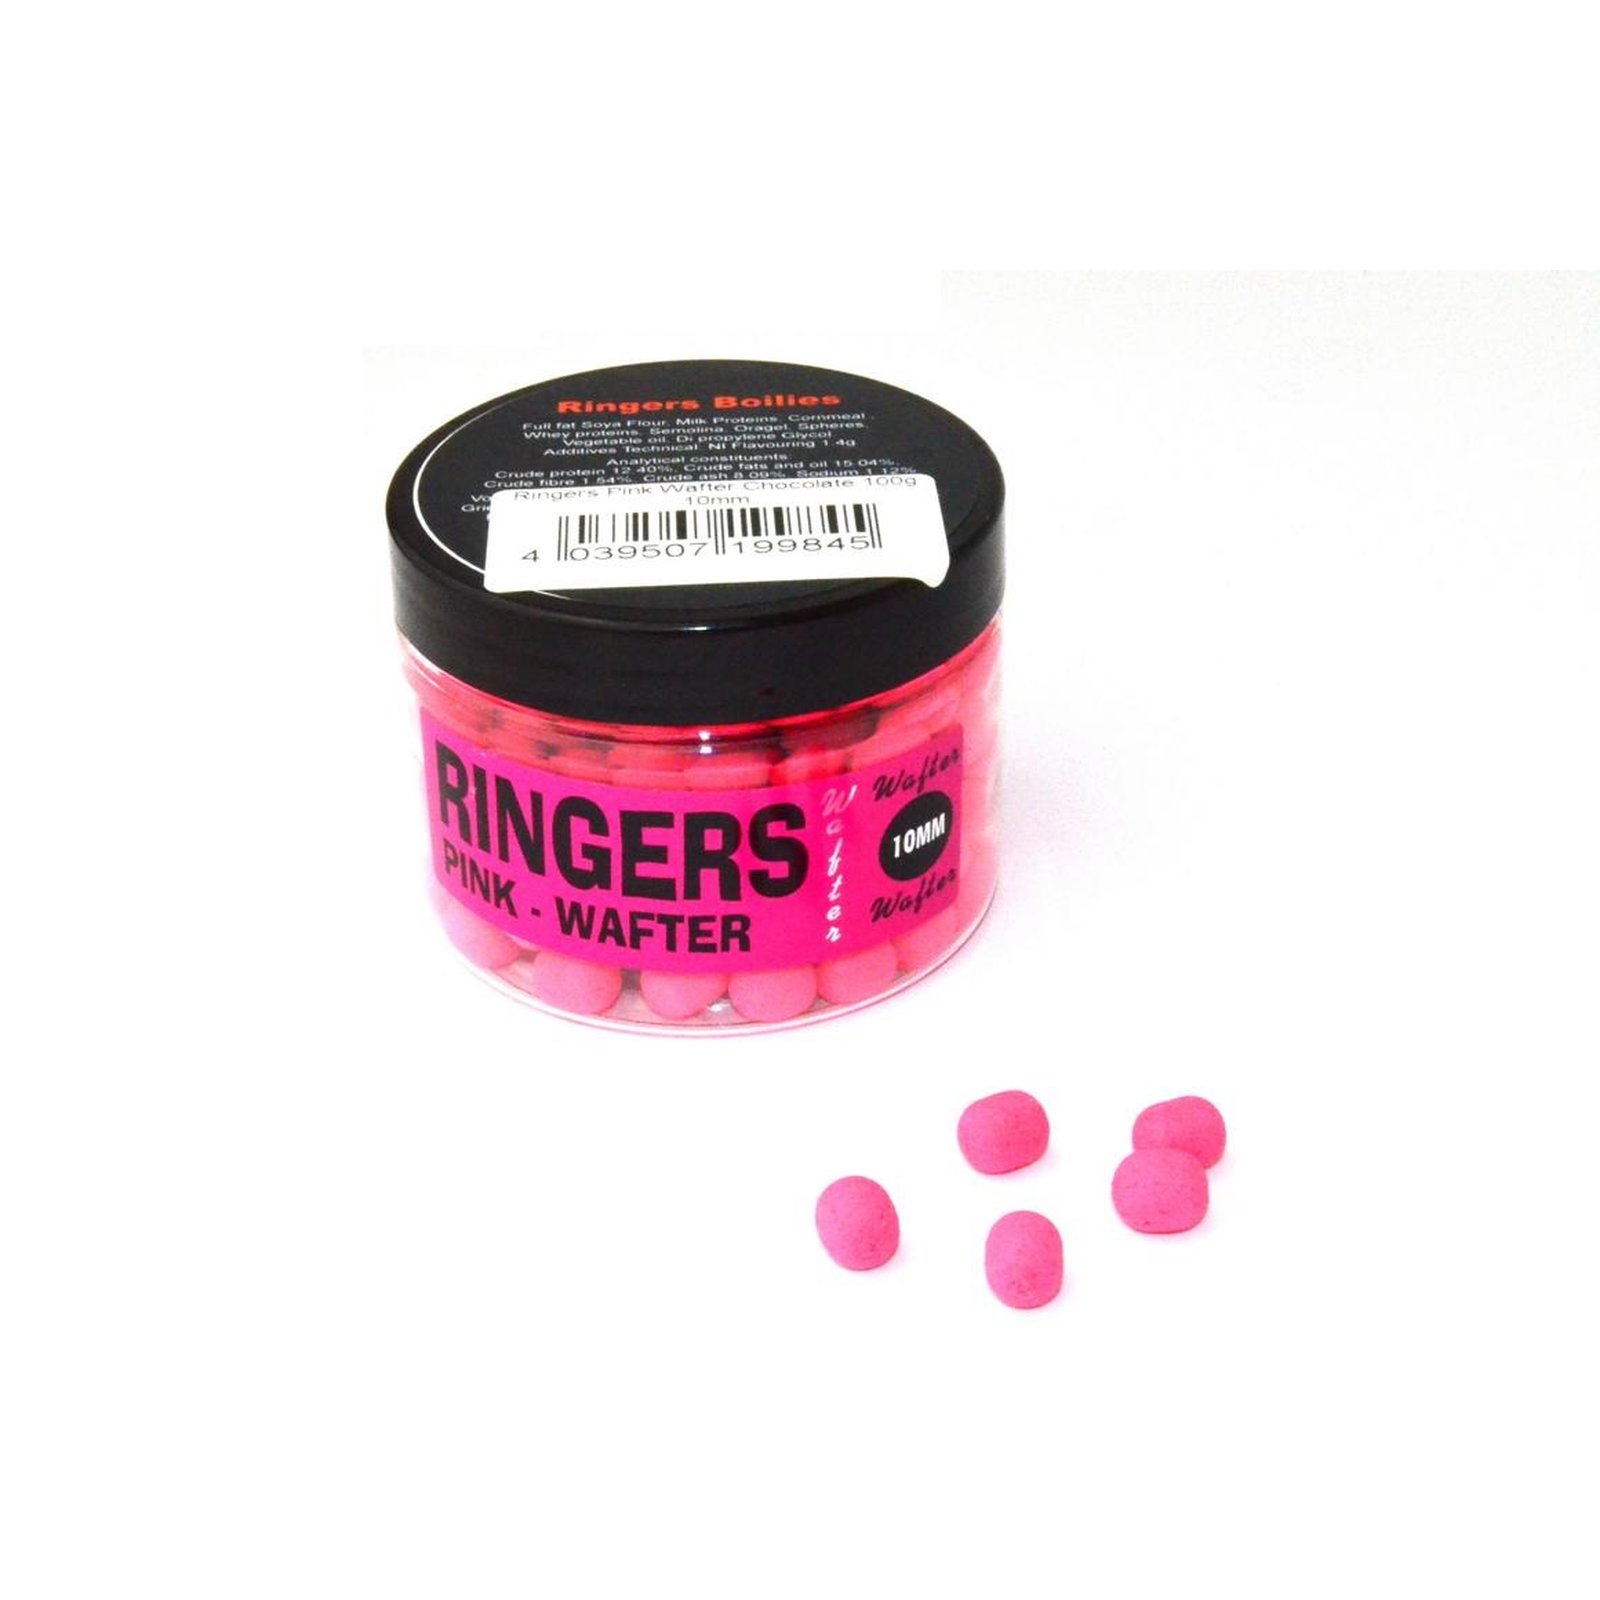 Ringers Pink Wafter Chocolate 100g 10mm